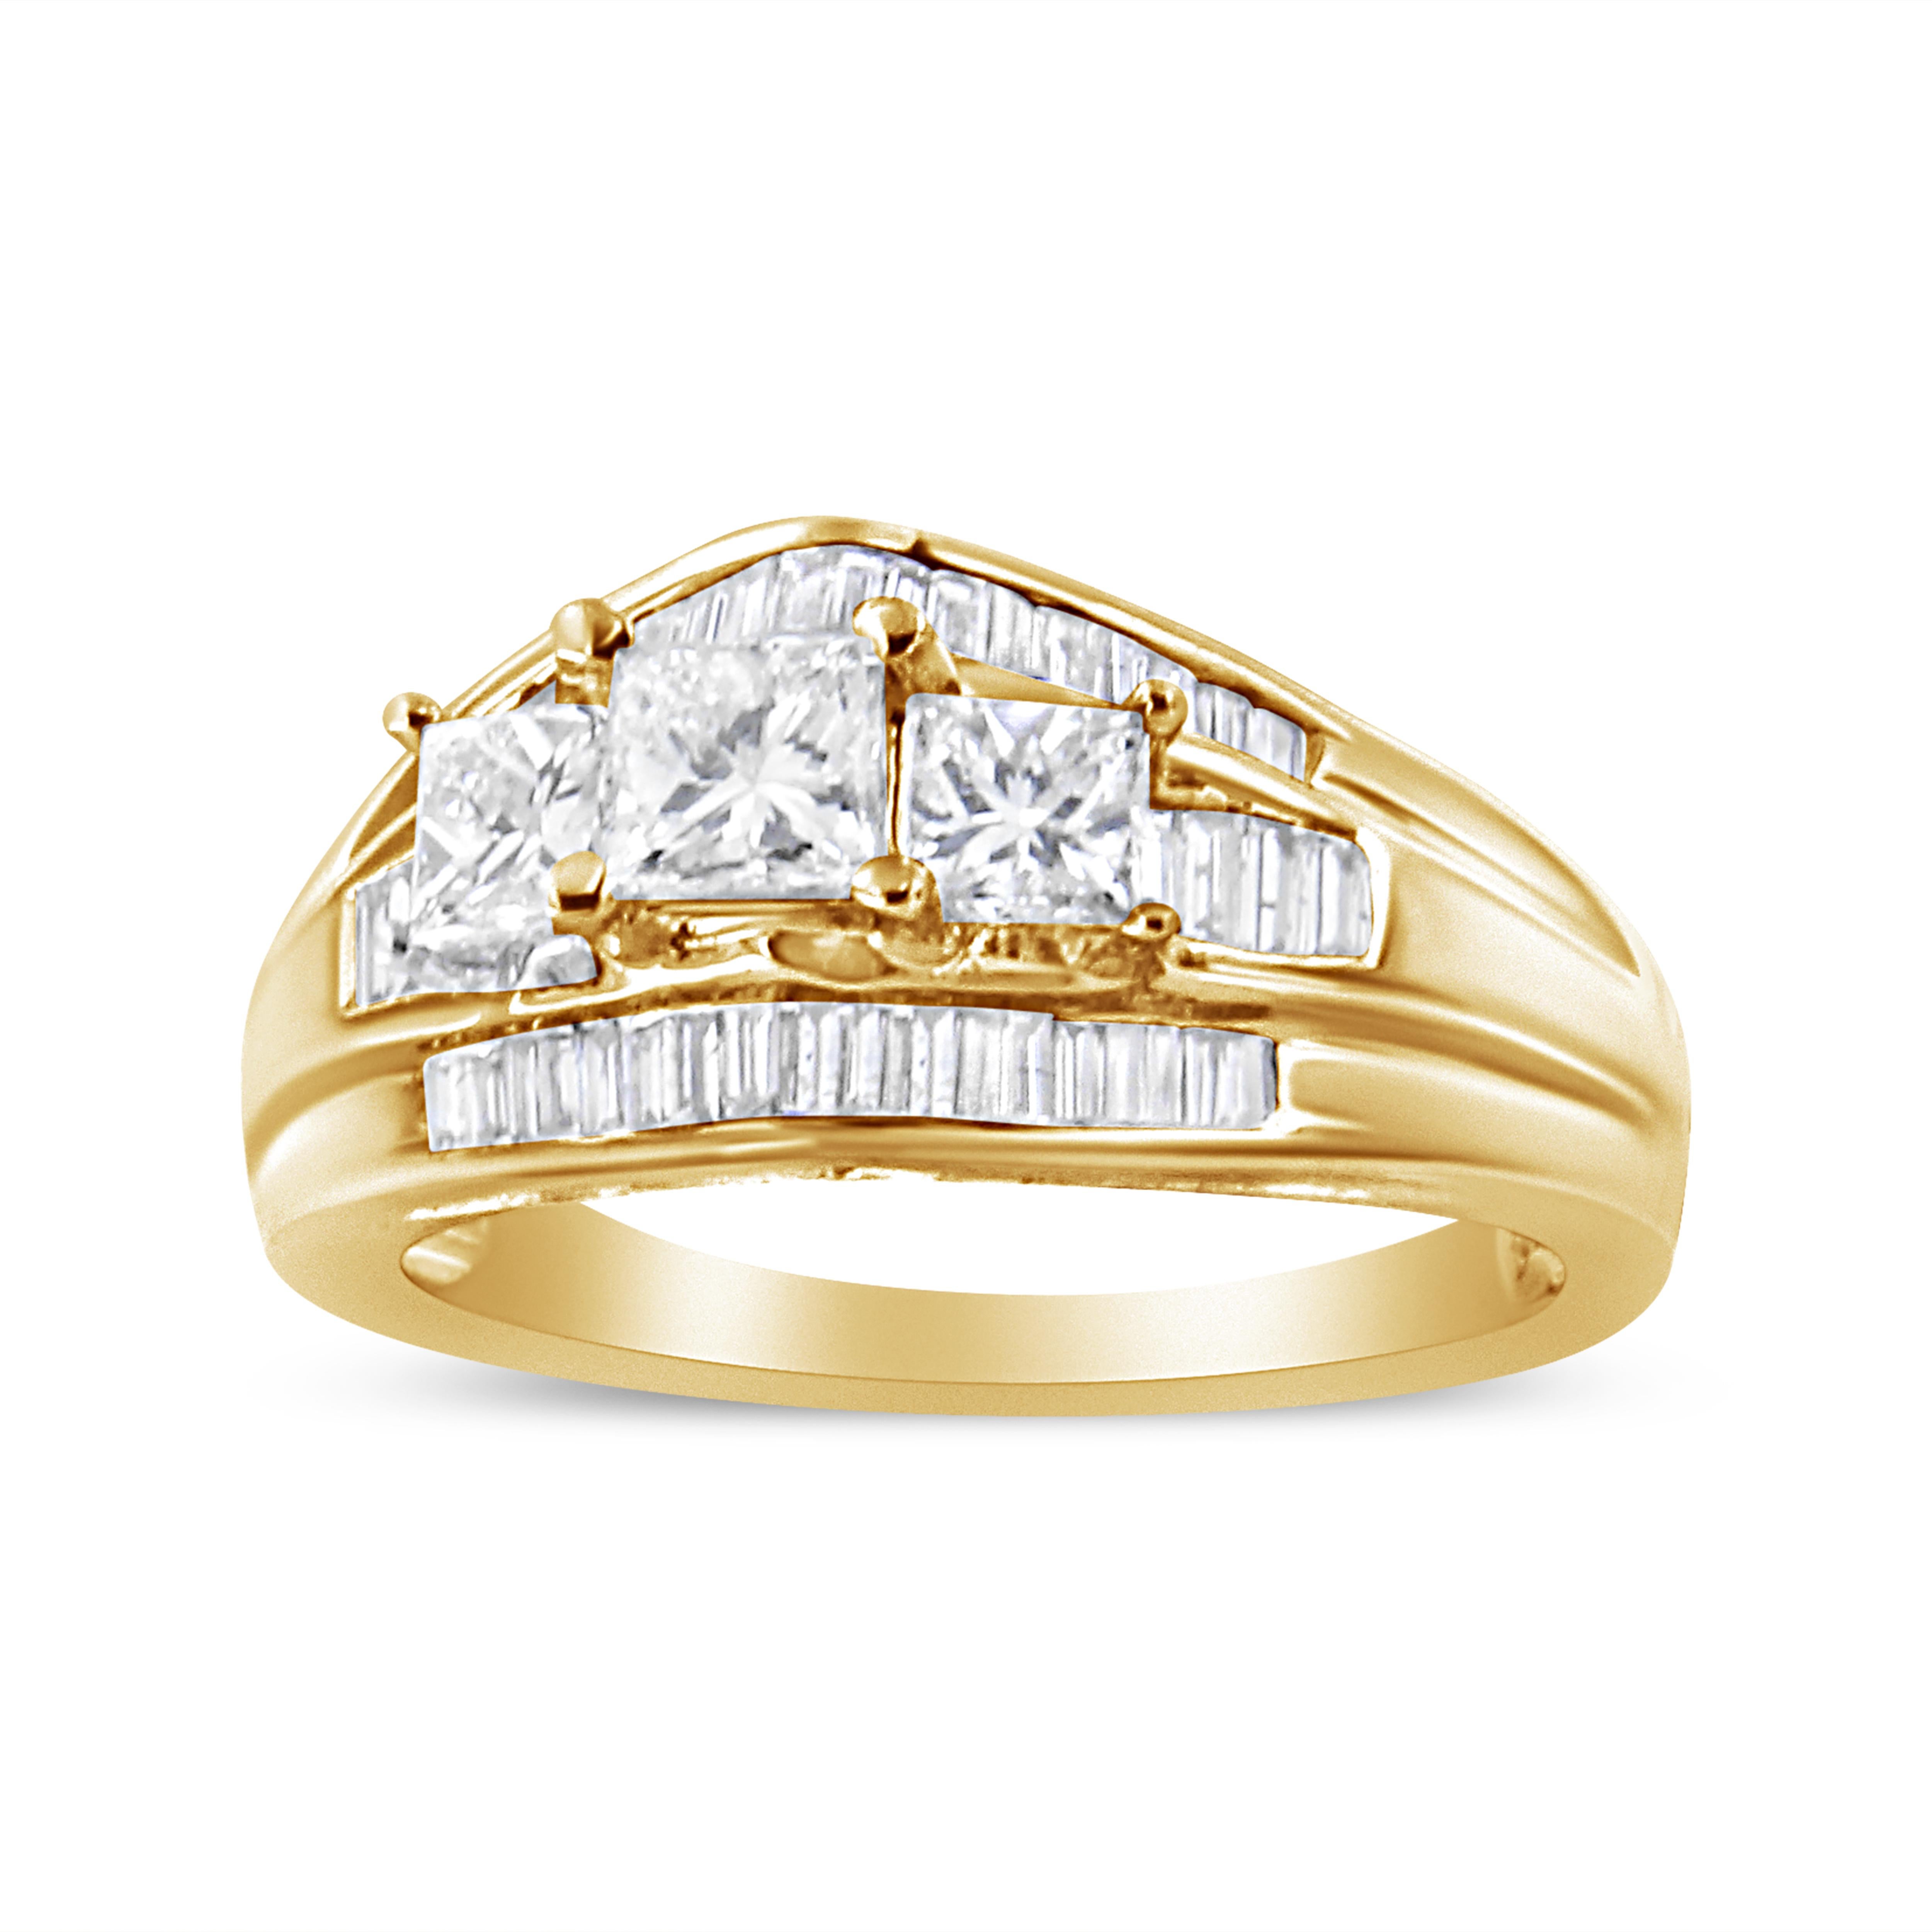 Bold and brilliant, this 14k yellow gold ring sparkles with 1 1/2 cttw of natural diamonds. At the center of this piece rests 3 beautiful, natural princess-cut diamonds in an elegant prong setting. The center 3-stone design is flanked by